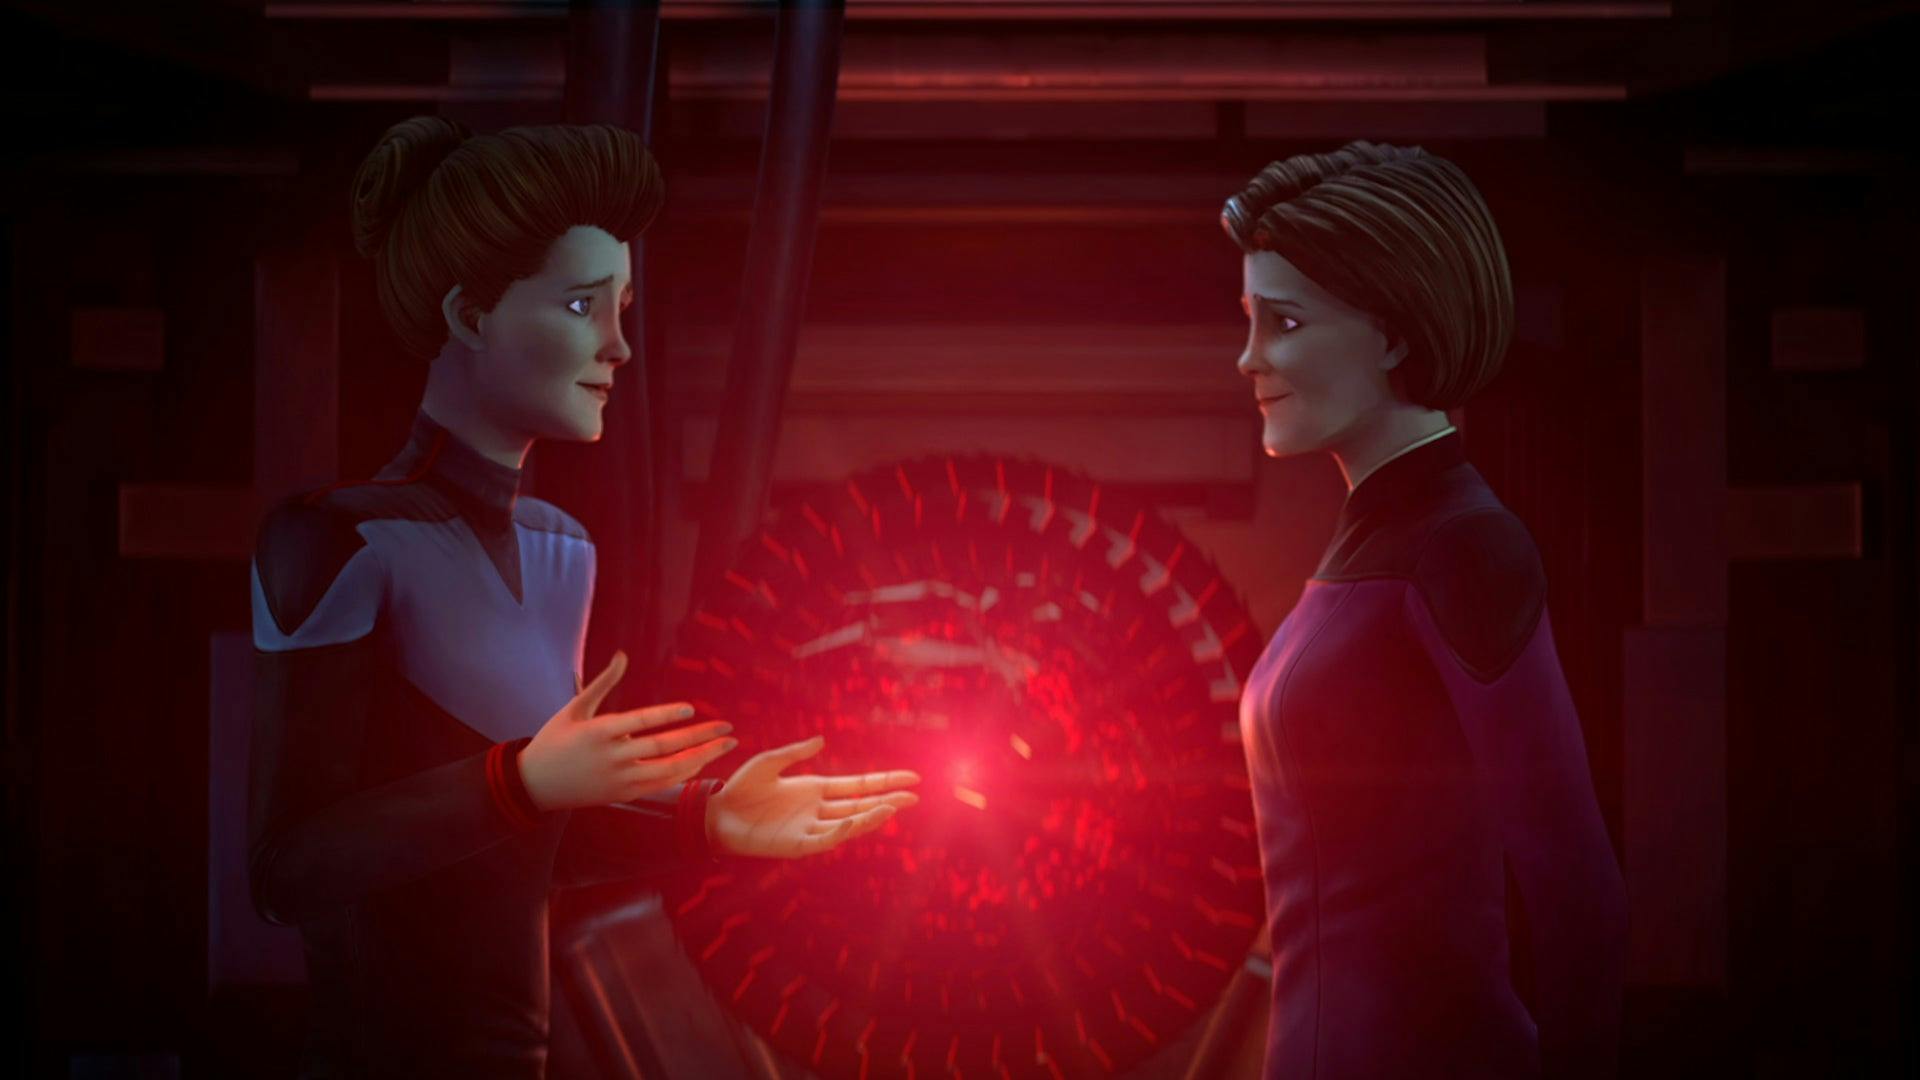 Holo-Janeway meets Vice Admiral Janeway in front of the Living Construct on Star Trek: Prodigy